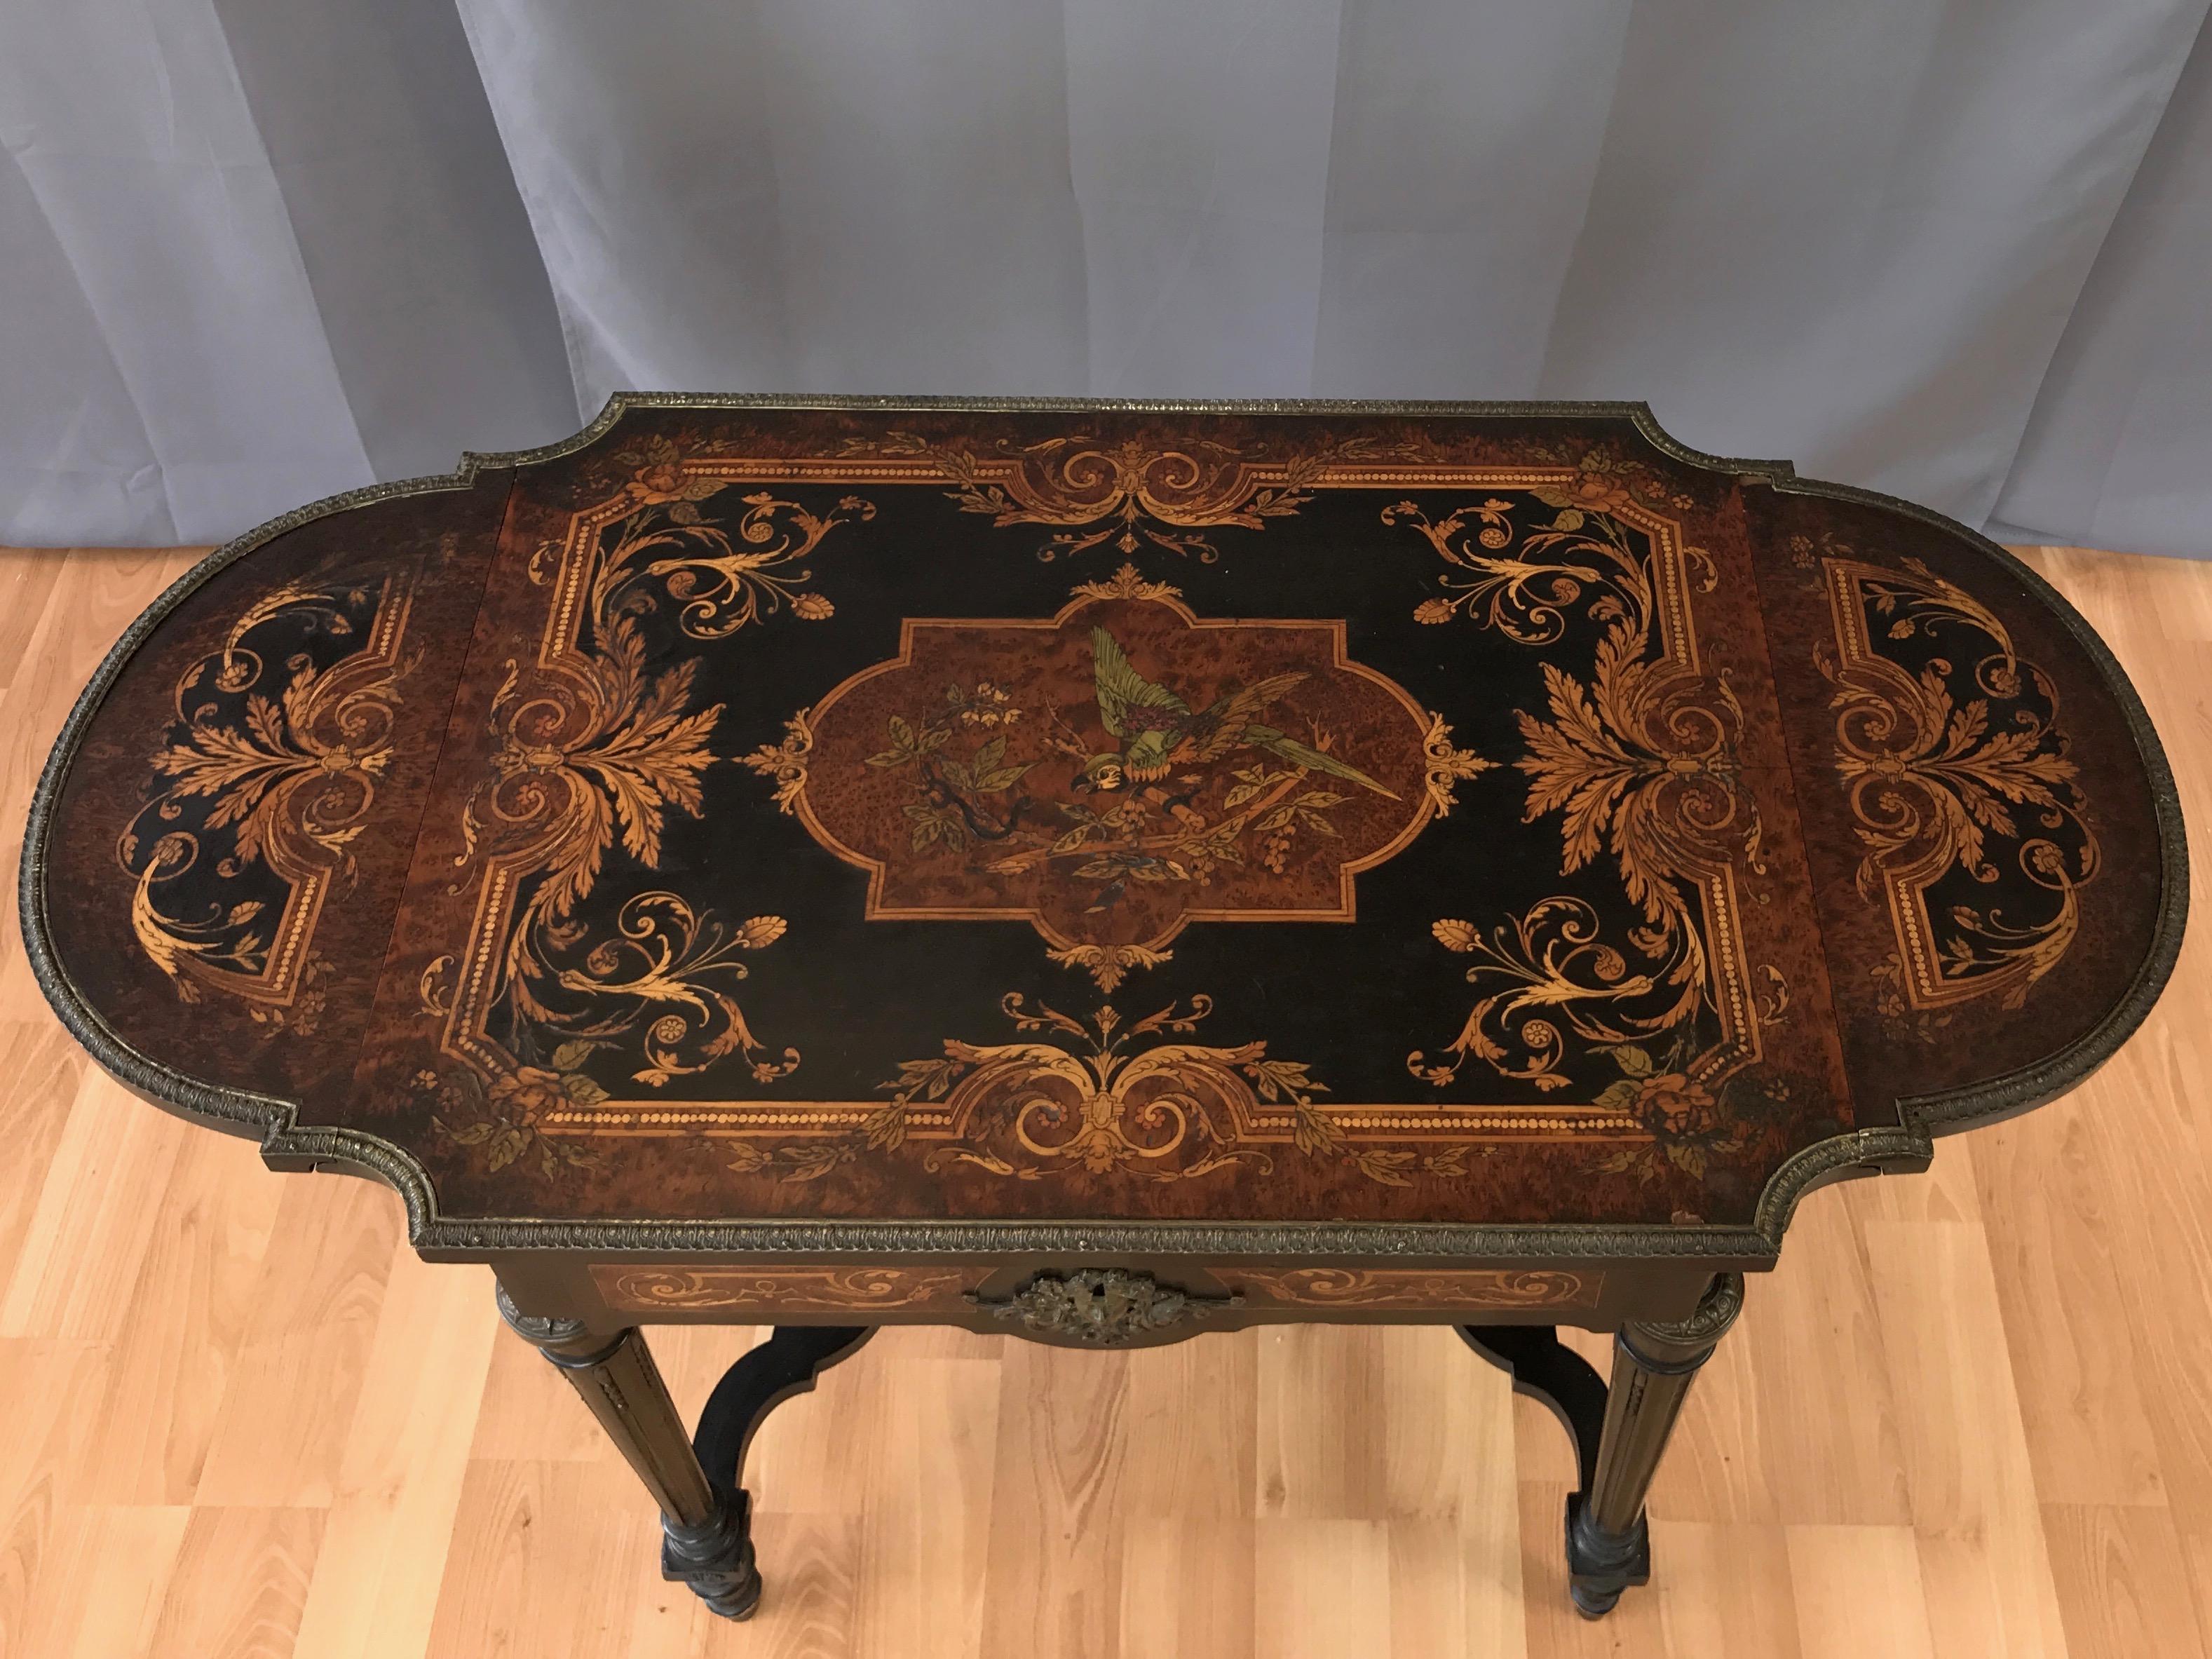 Ebonized Napoleon III French Marquetry Drop-Leaf Salon or Writing Table with Drawer, 1860